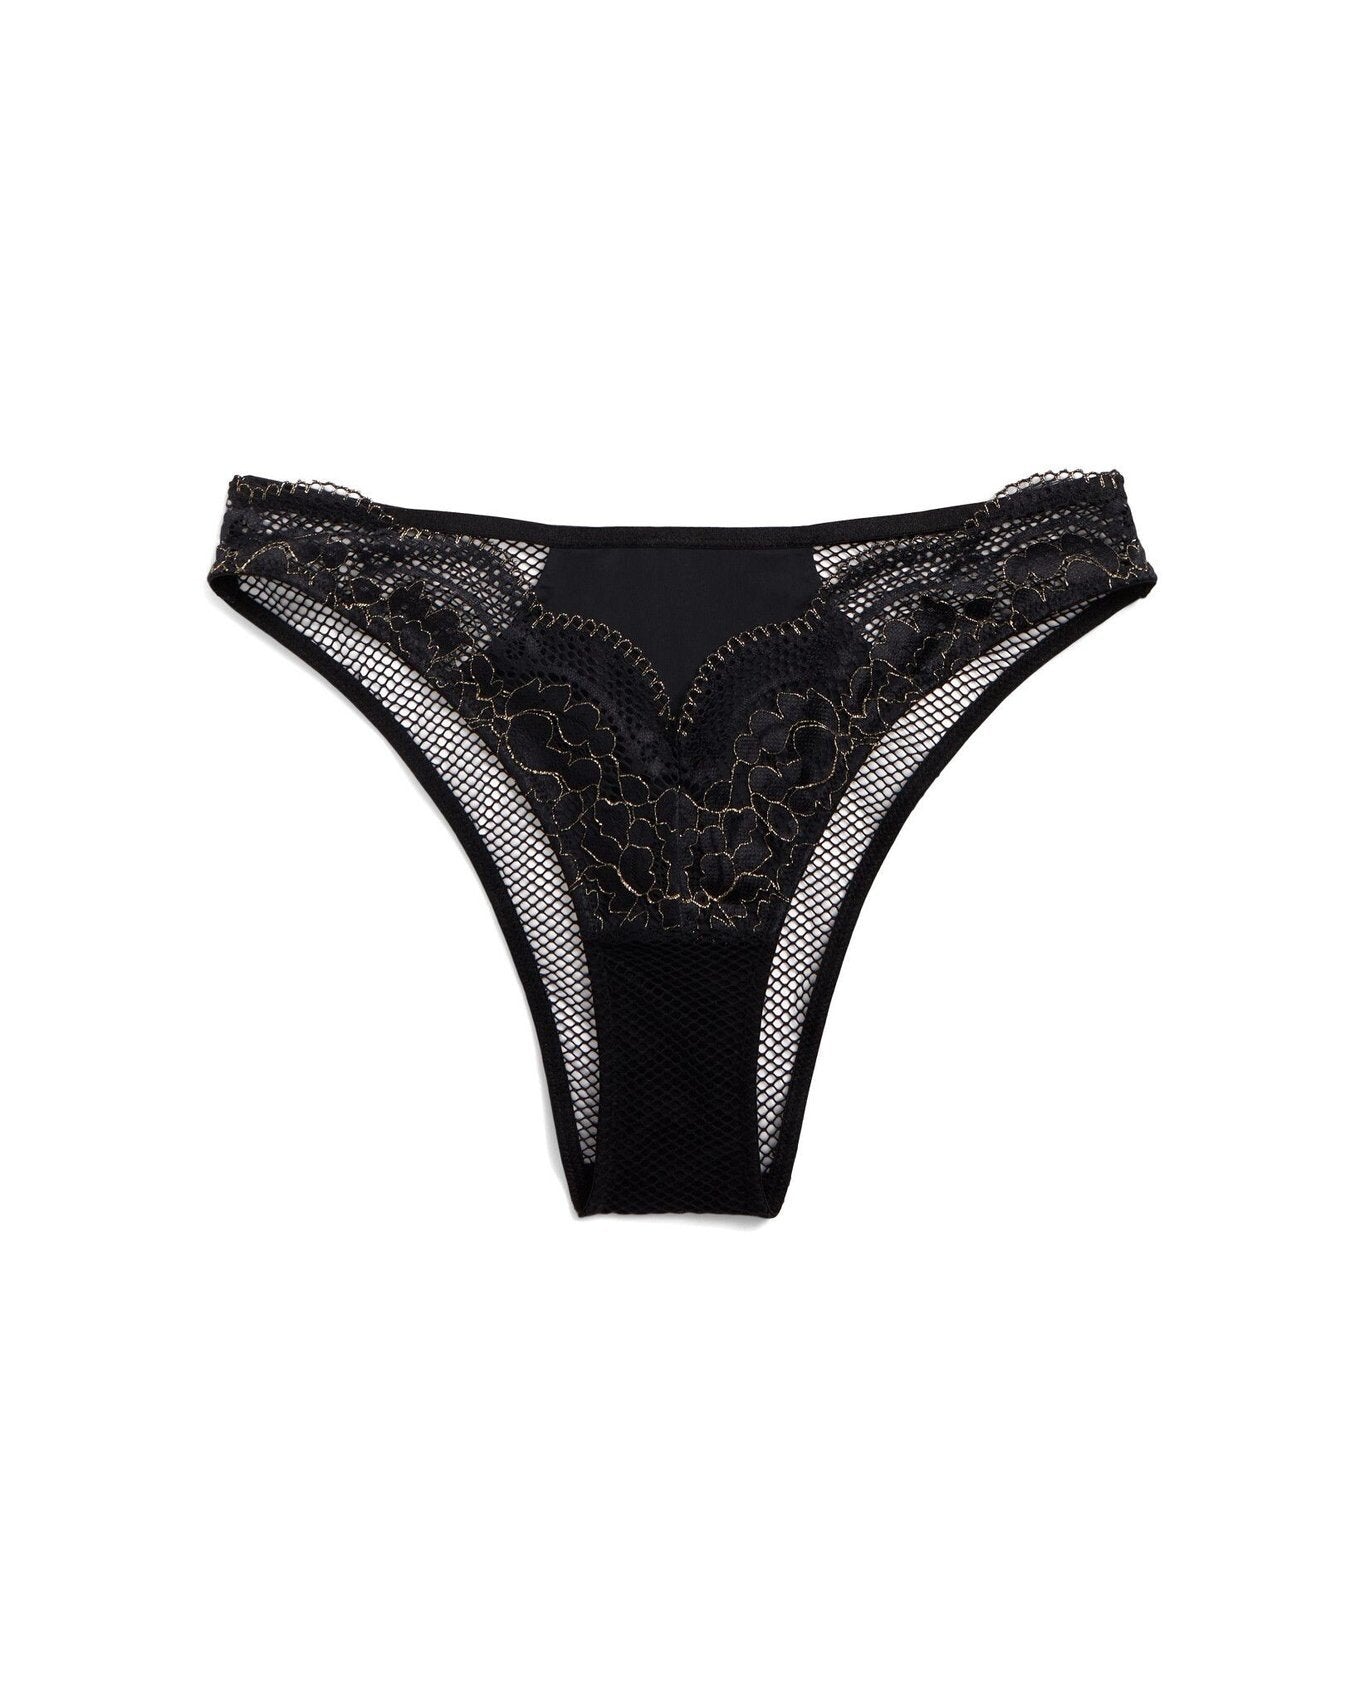 Adore Me Farina Brazilian Panty in color Jet Black and shape cheeky